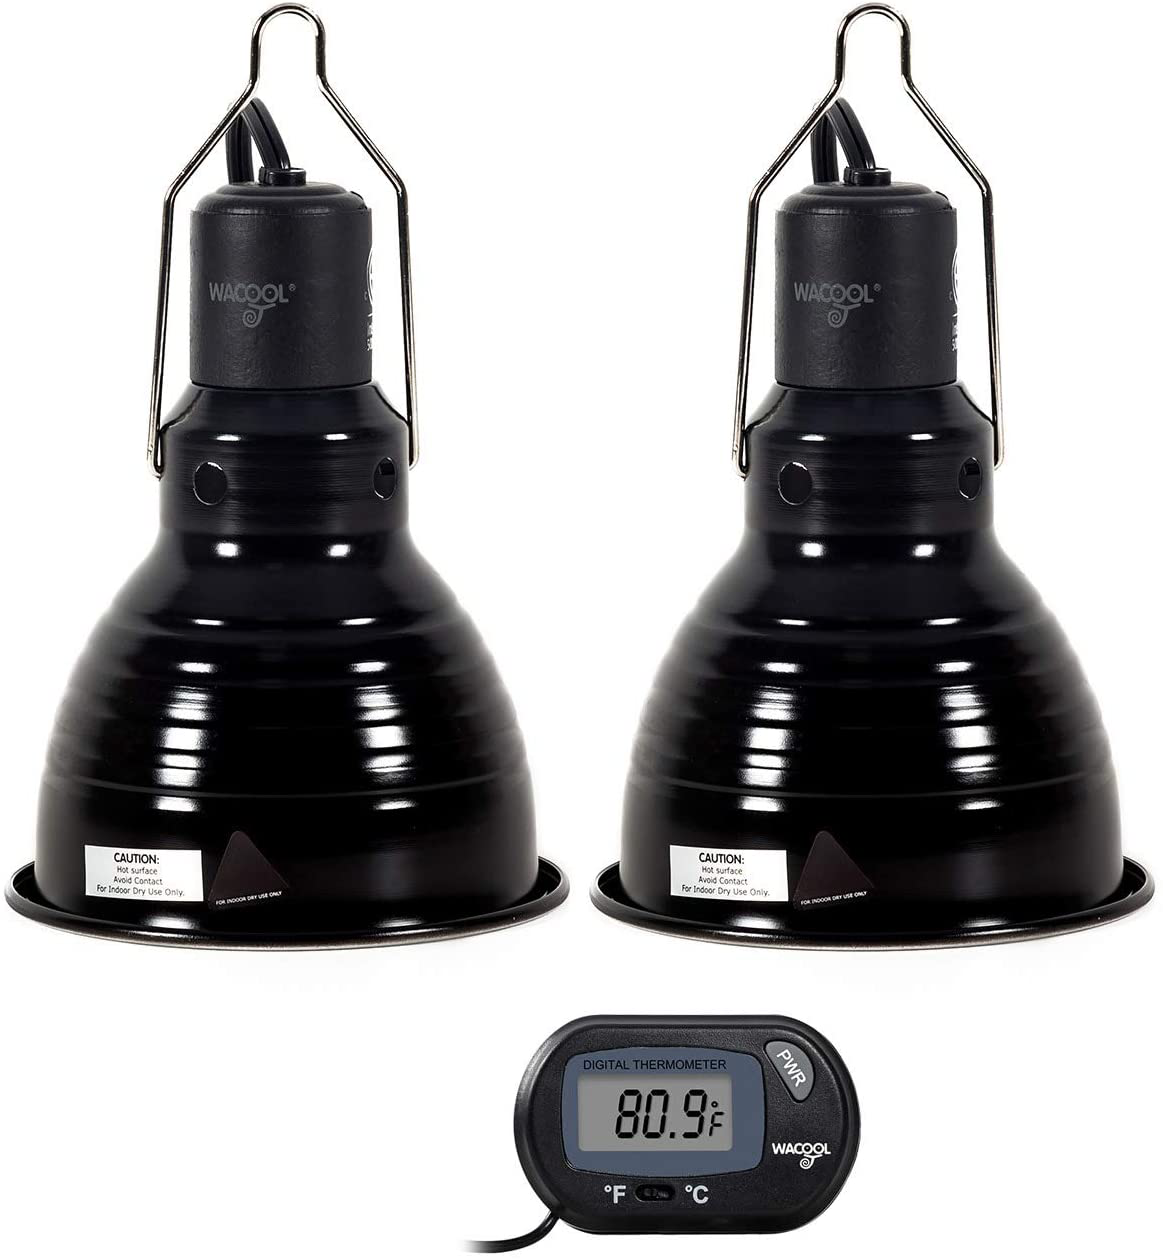 WACOOL Reptile Light Fixture 5.5 Inch & Thermometer, Pack of 2 PCS Deep Dome Cap Lamp Fixture Optical Reflection Cover & Temperature Gauge for Reptile Heat Lamp UVA UVB Light Bulb